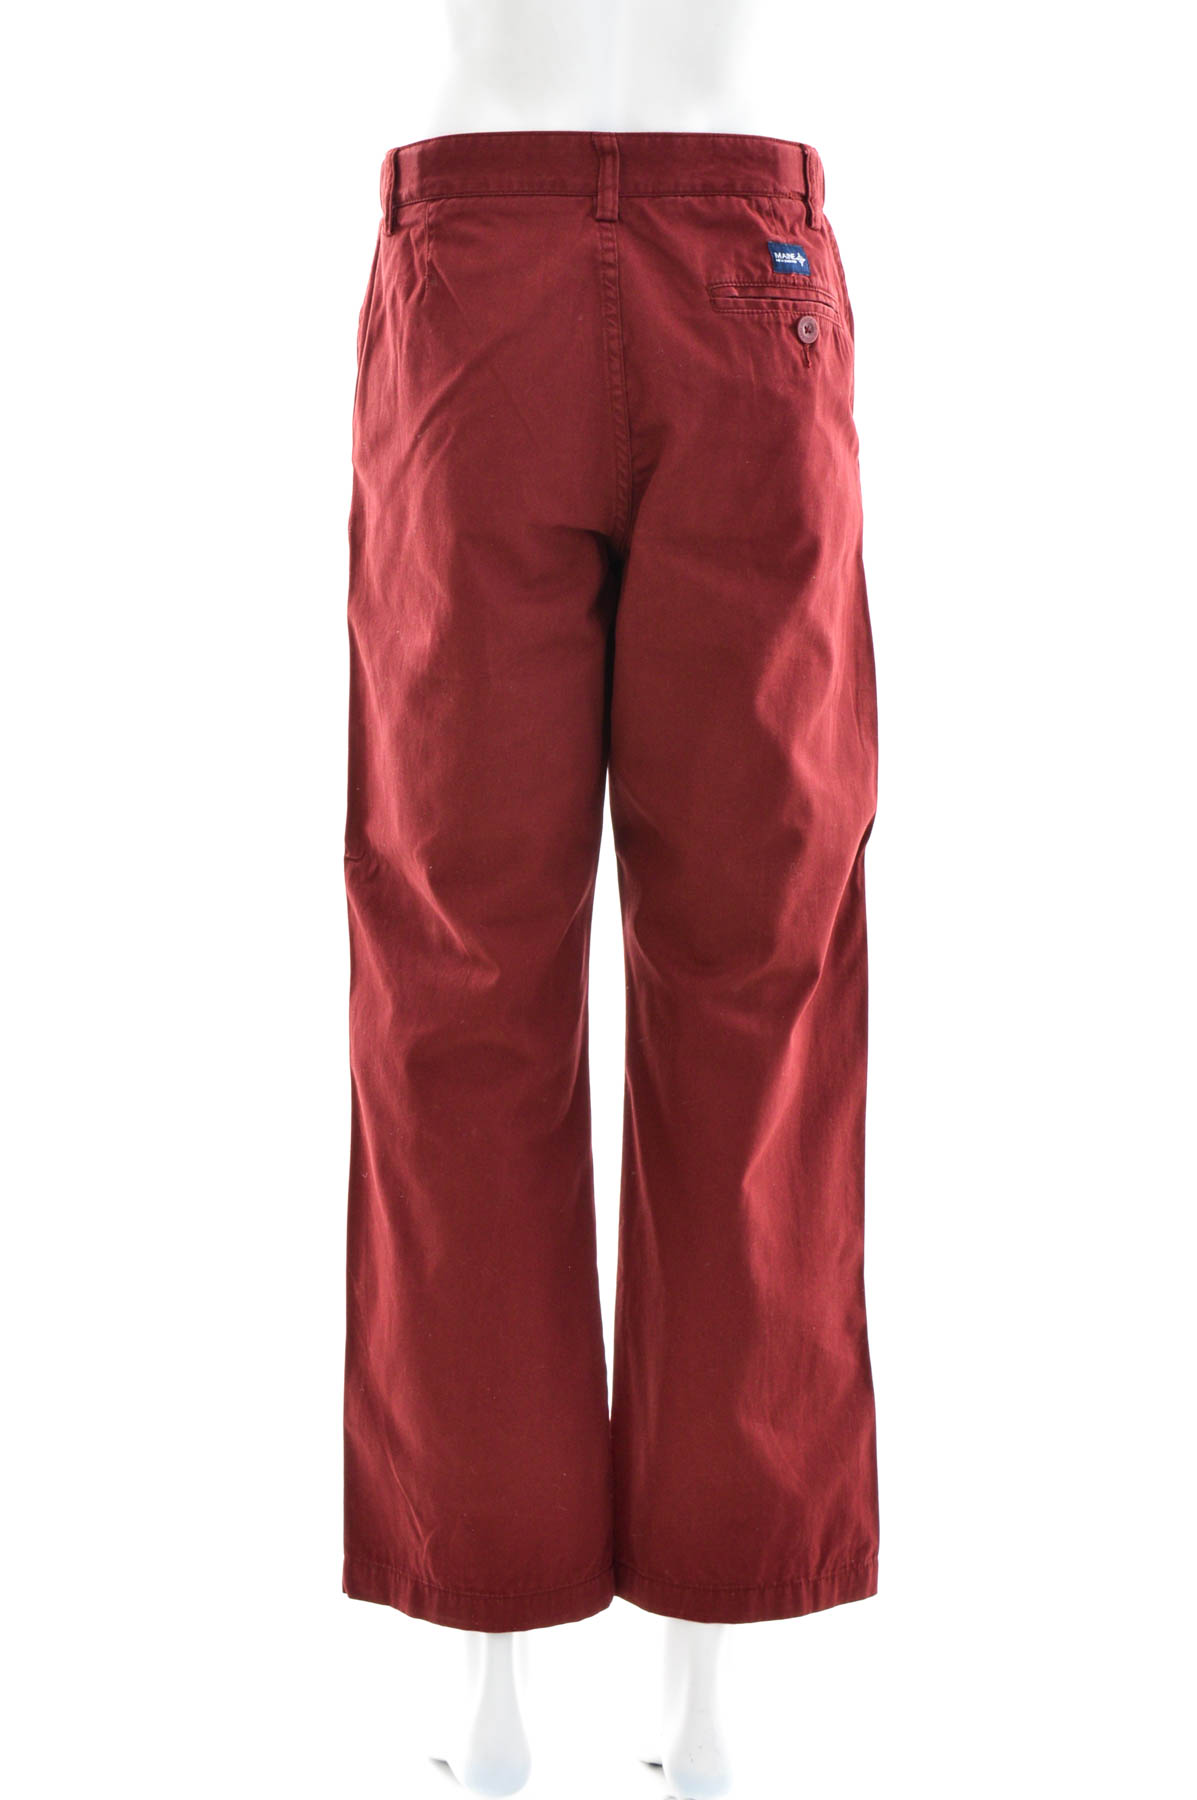 Men's trousers - MAINE NEW ENGLAND - 1